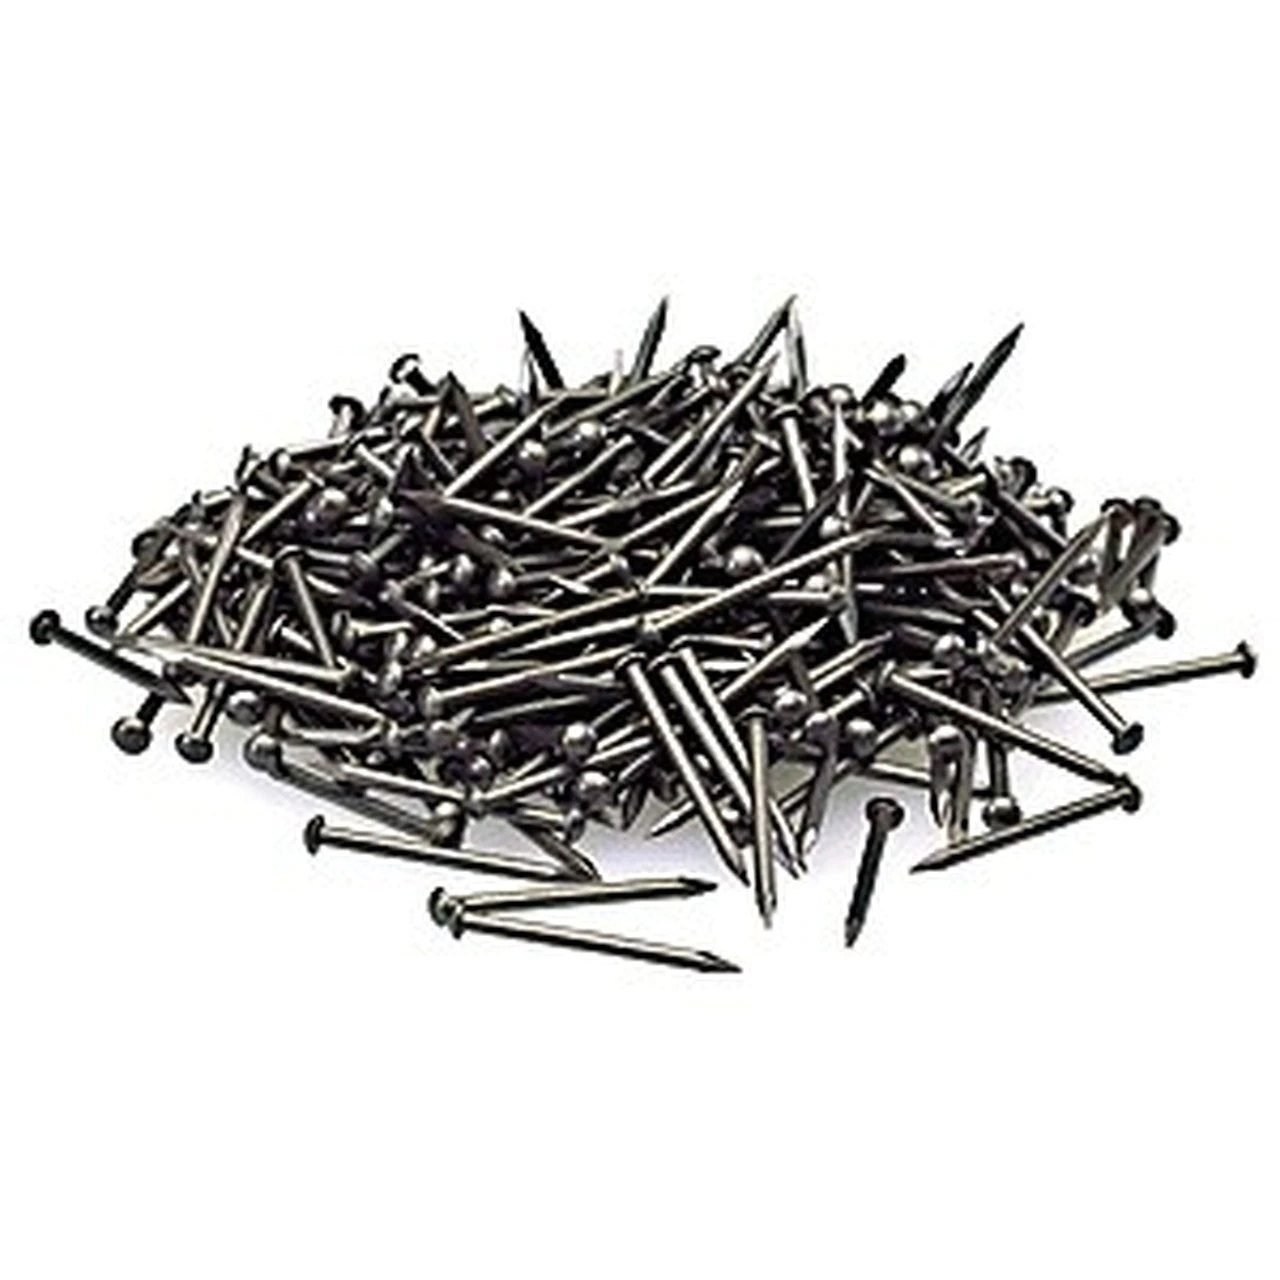 Atlas #2540 Track Nails (for HO and N) (approx. 1.4oz - 500 pcs)